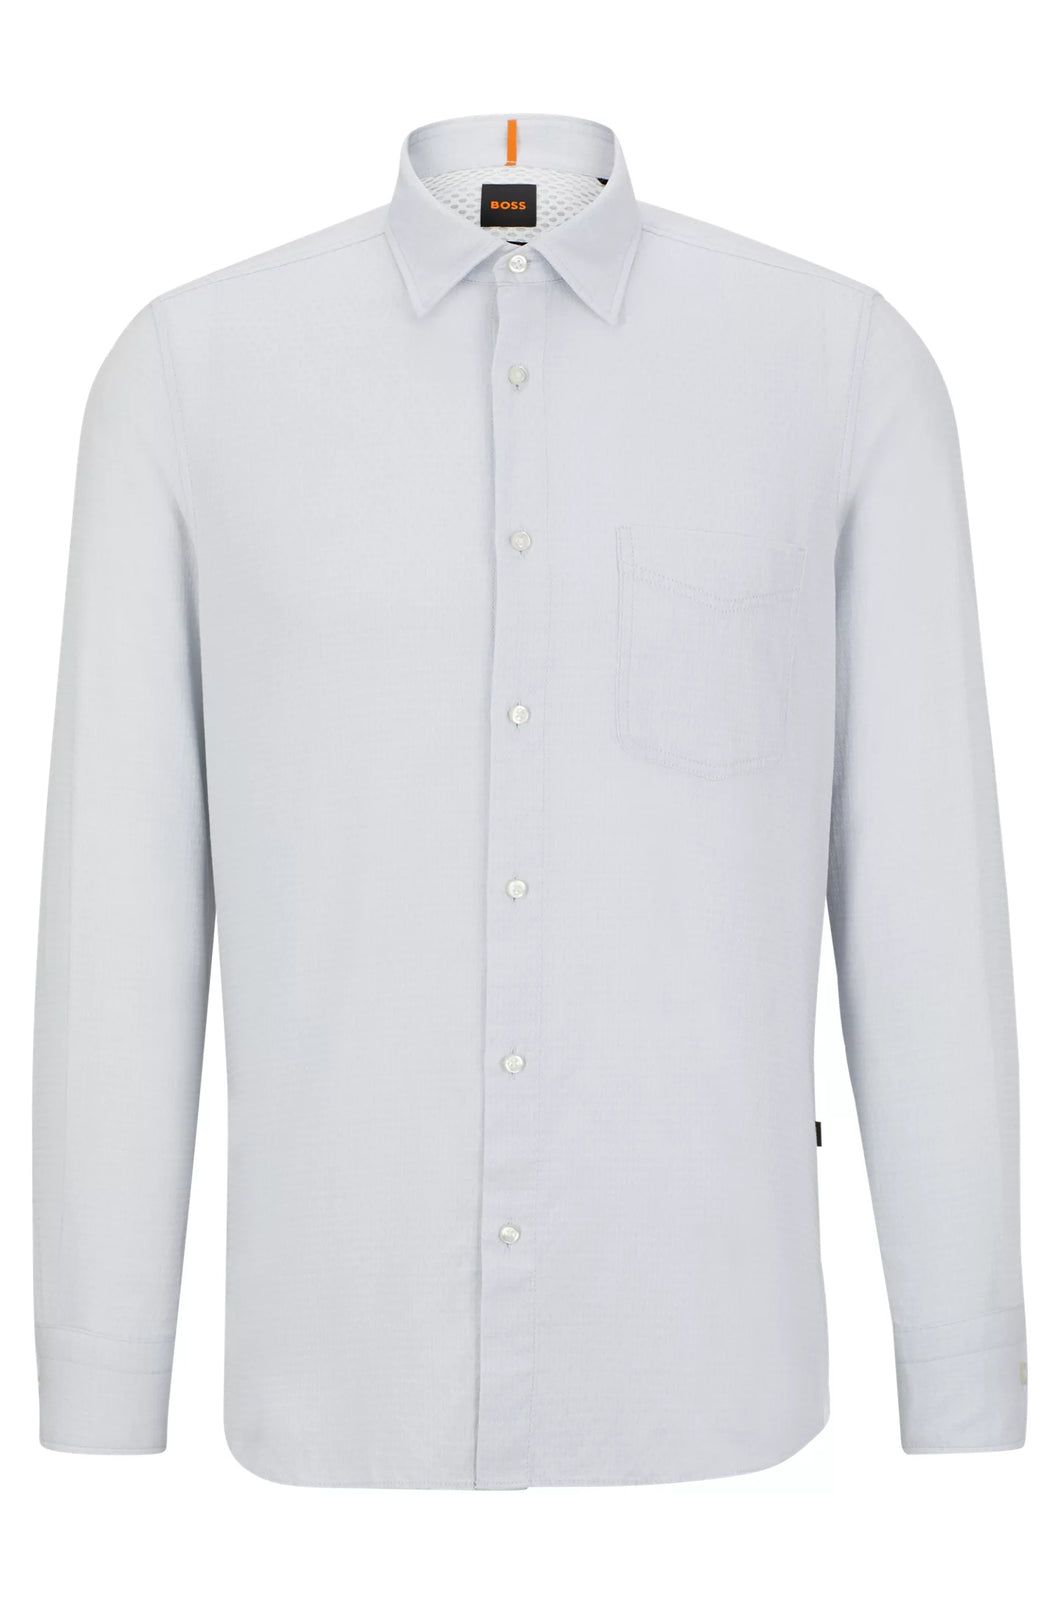 REGULAR-FIT SHIRT IN COTTON DOBBY